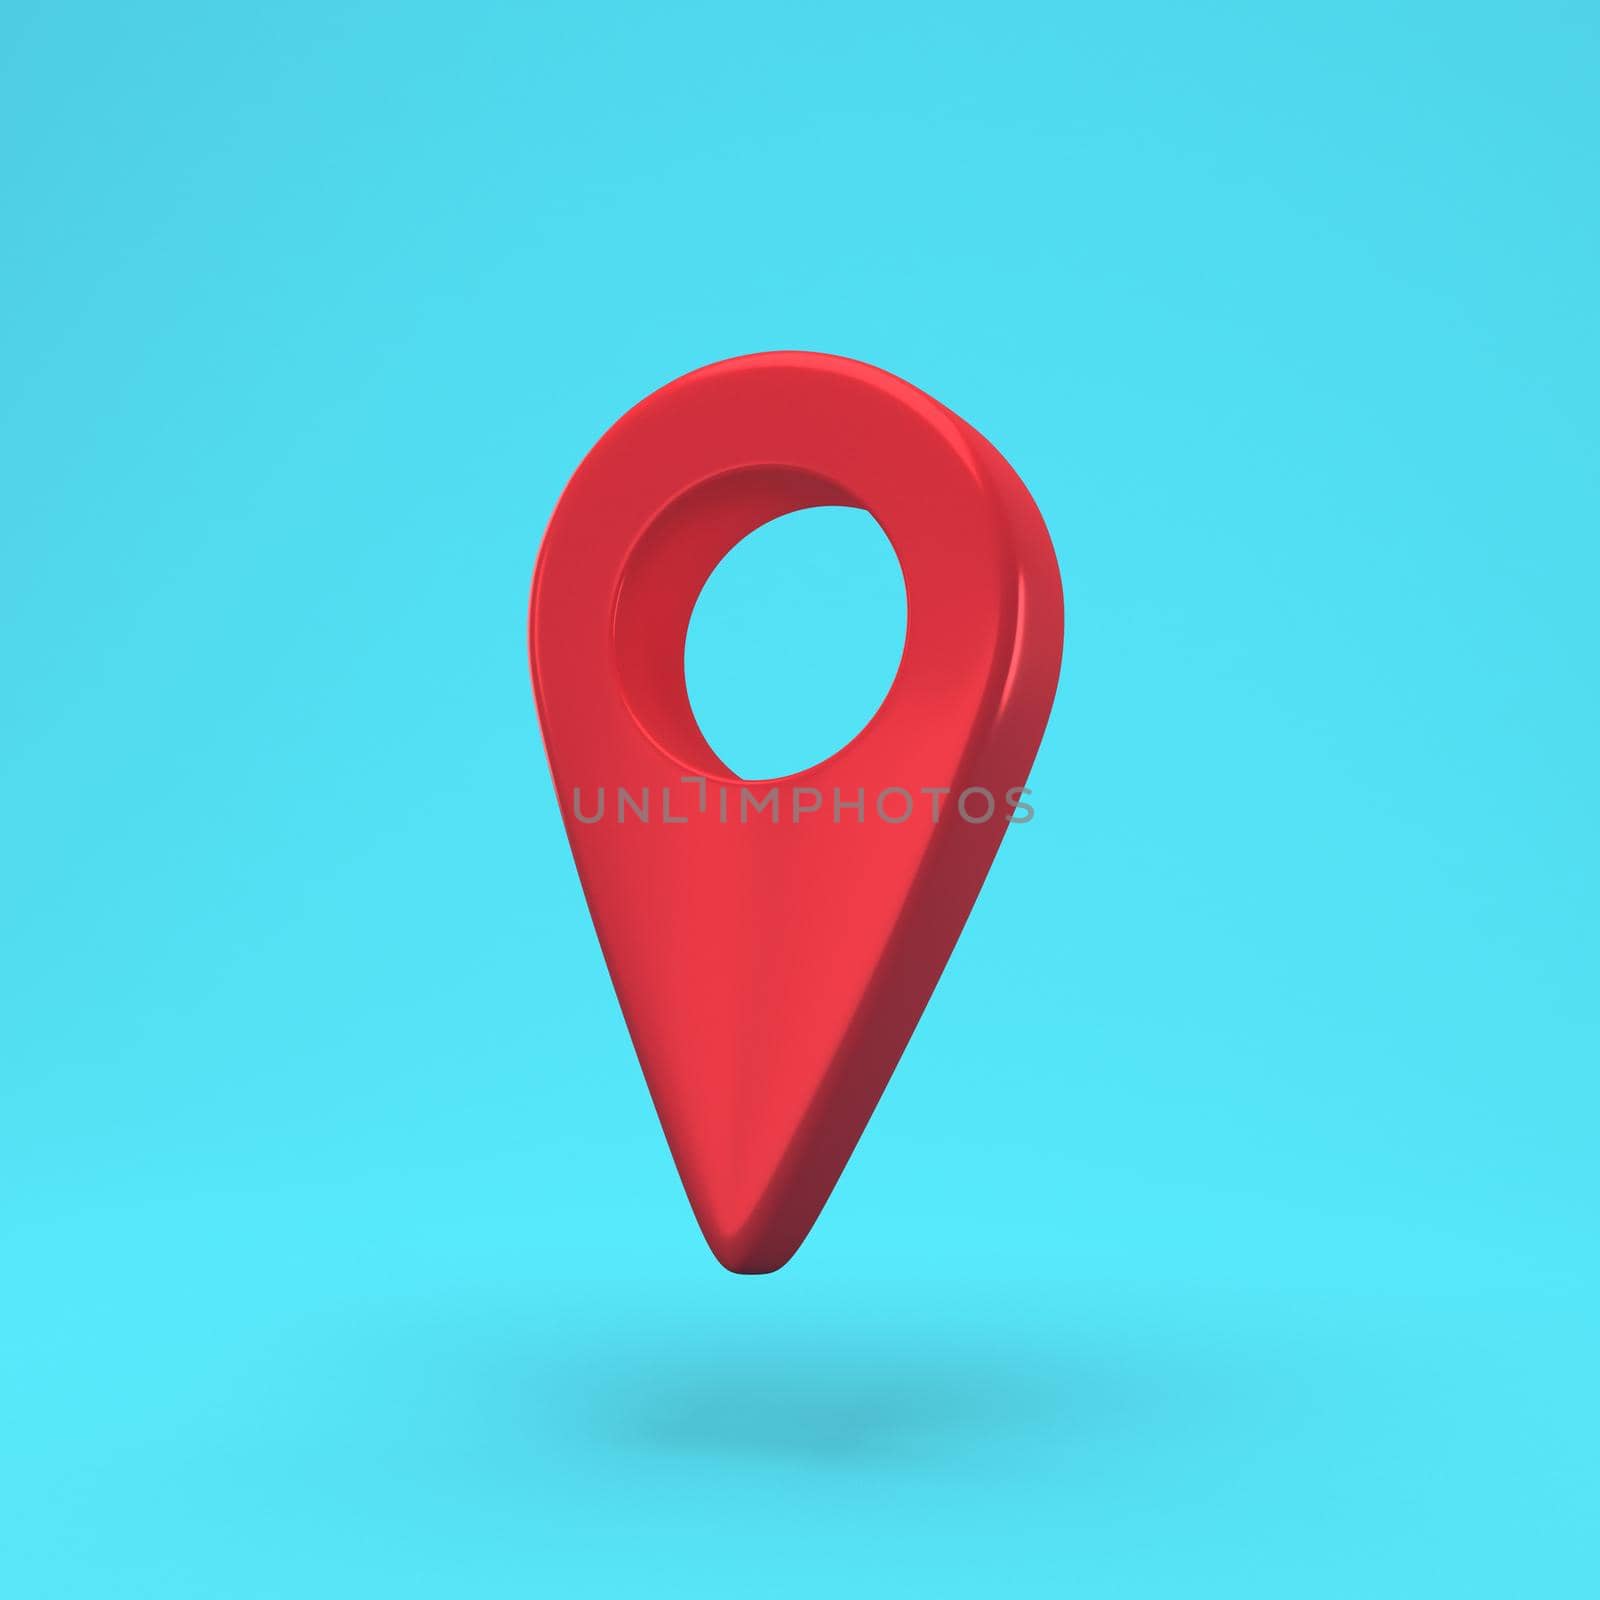 Red Map pin icon isolated background. Navigation, pointer, location, map, gps, direction, place, compass, contact, search concept. Minimalism concept. 3d illustration 3D render by lunarts